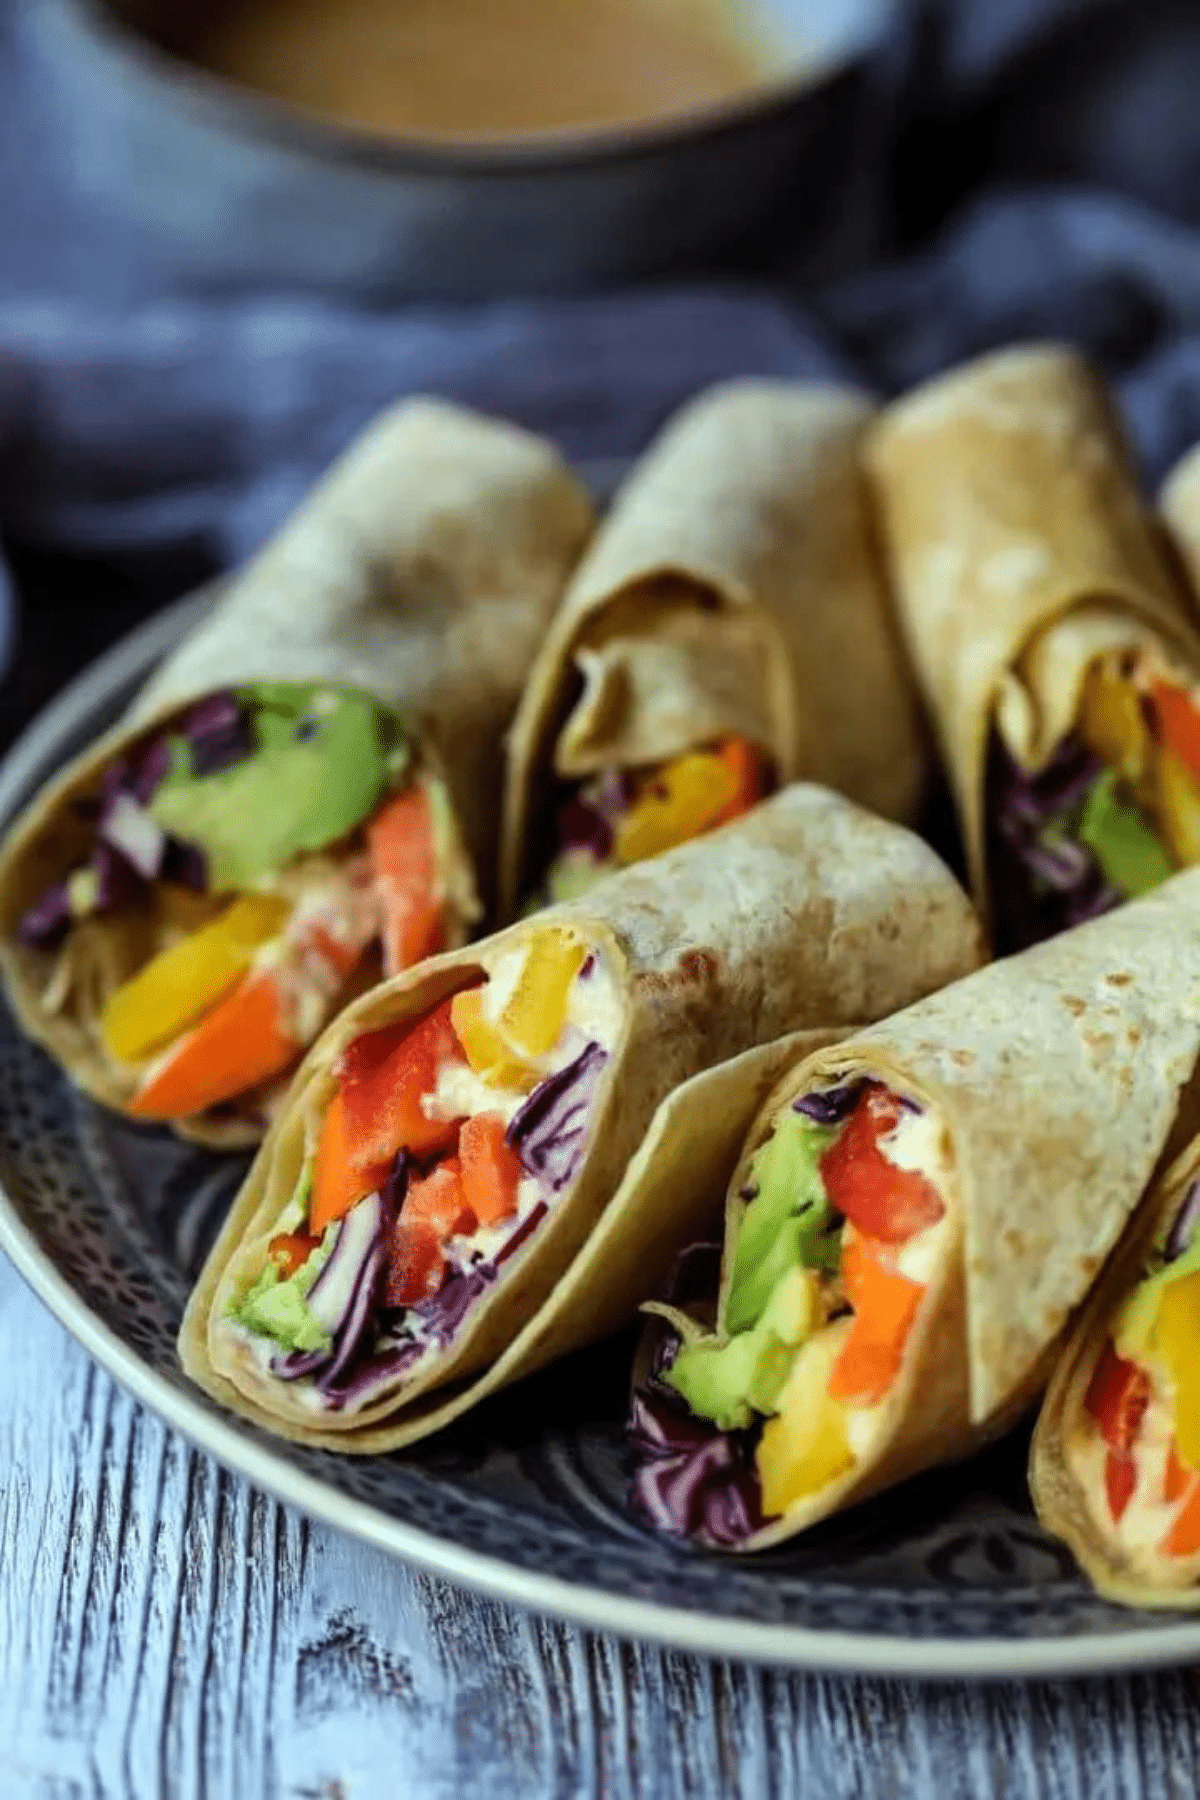 Vegan Wraps served on a plate.